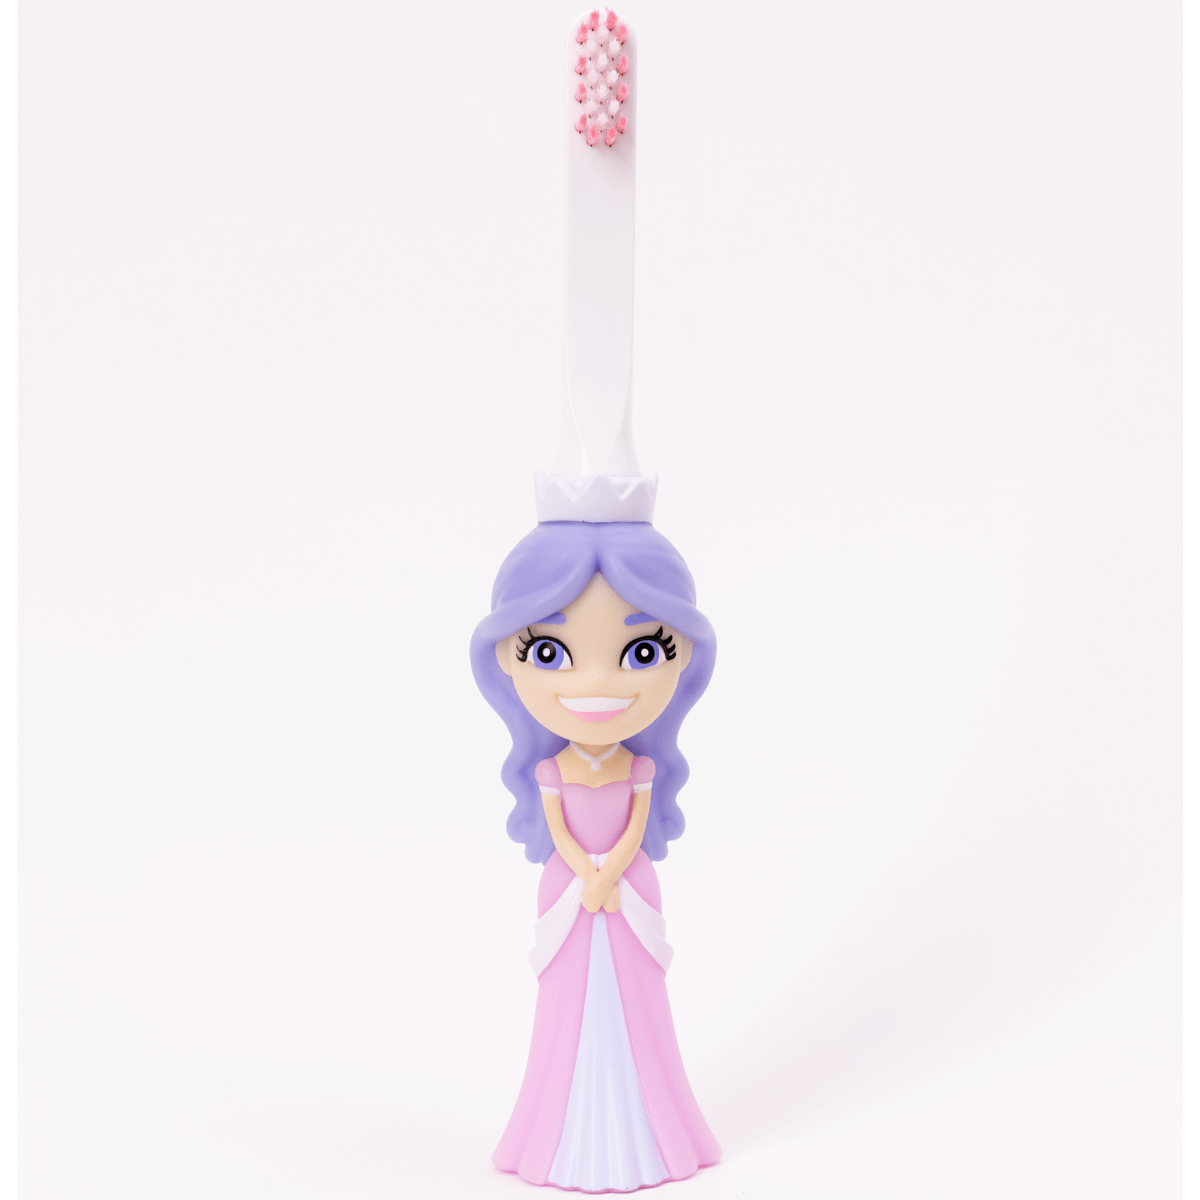 Princess Pearly Whites toothbrush with a princess-themed design